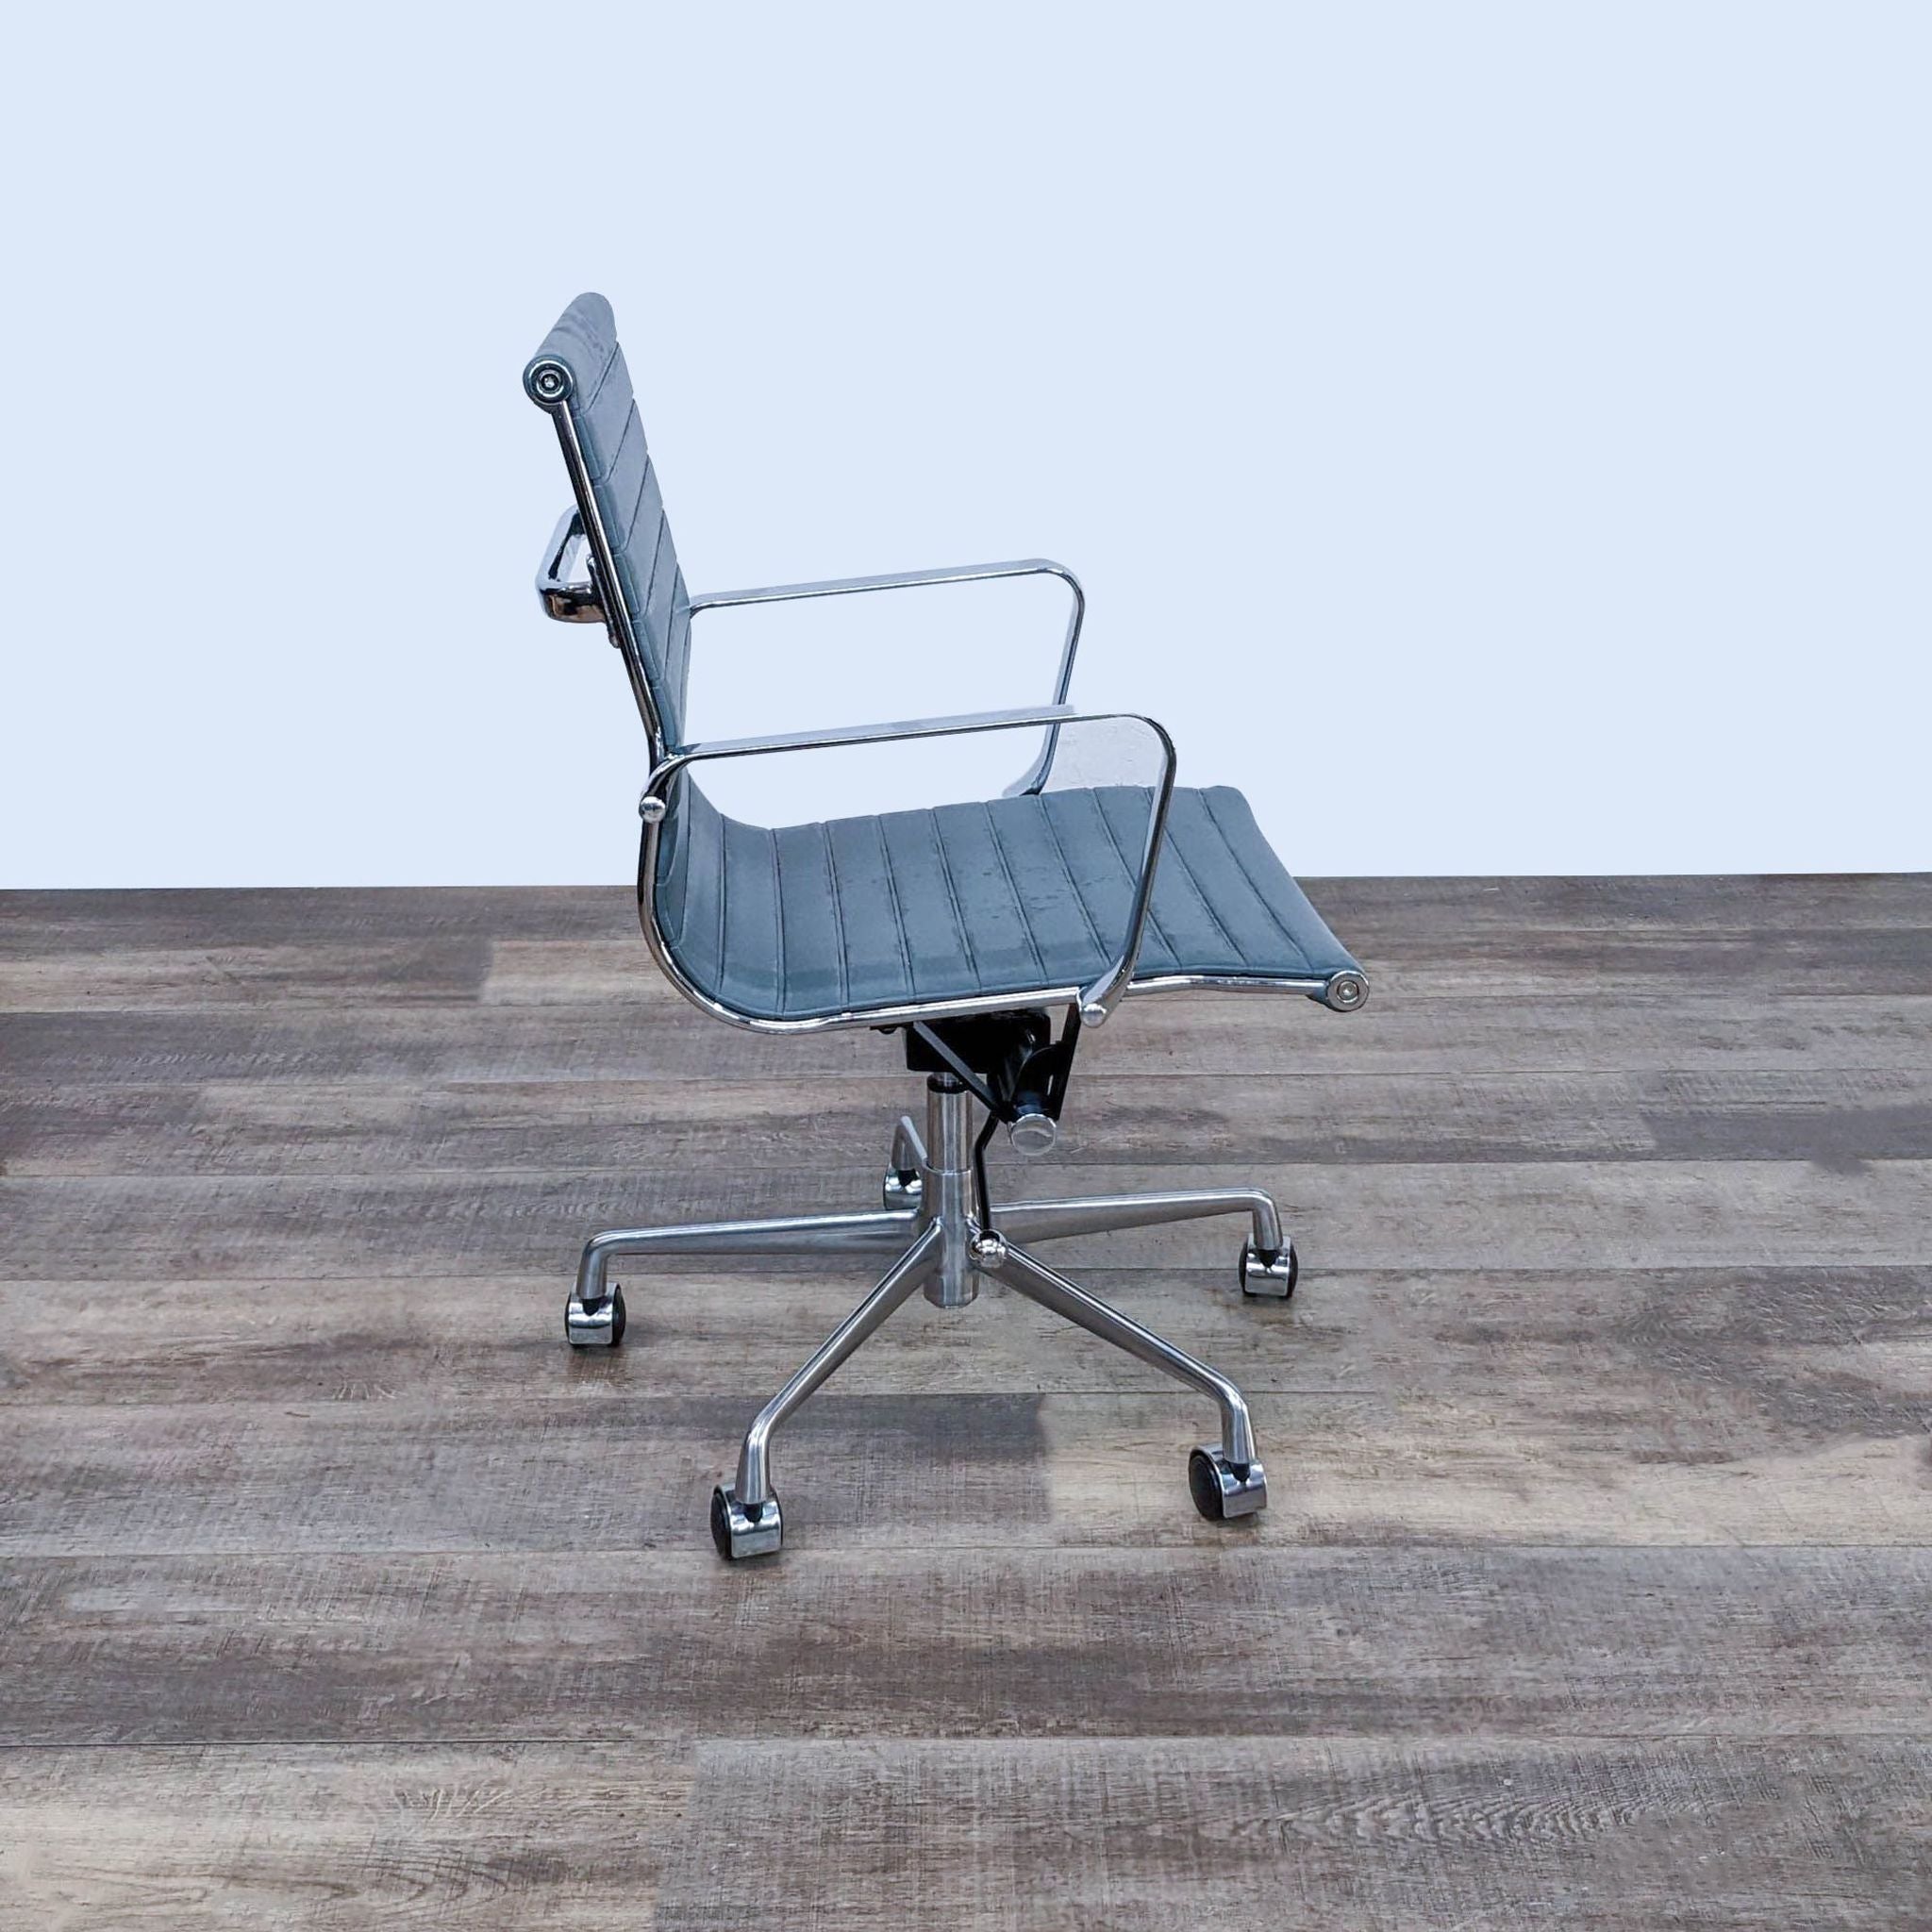 Chrome-finished metal frame office chair by Reperch with adjustable height and embossed blue faux leather for breathability.